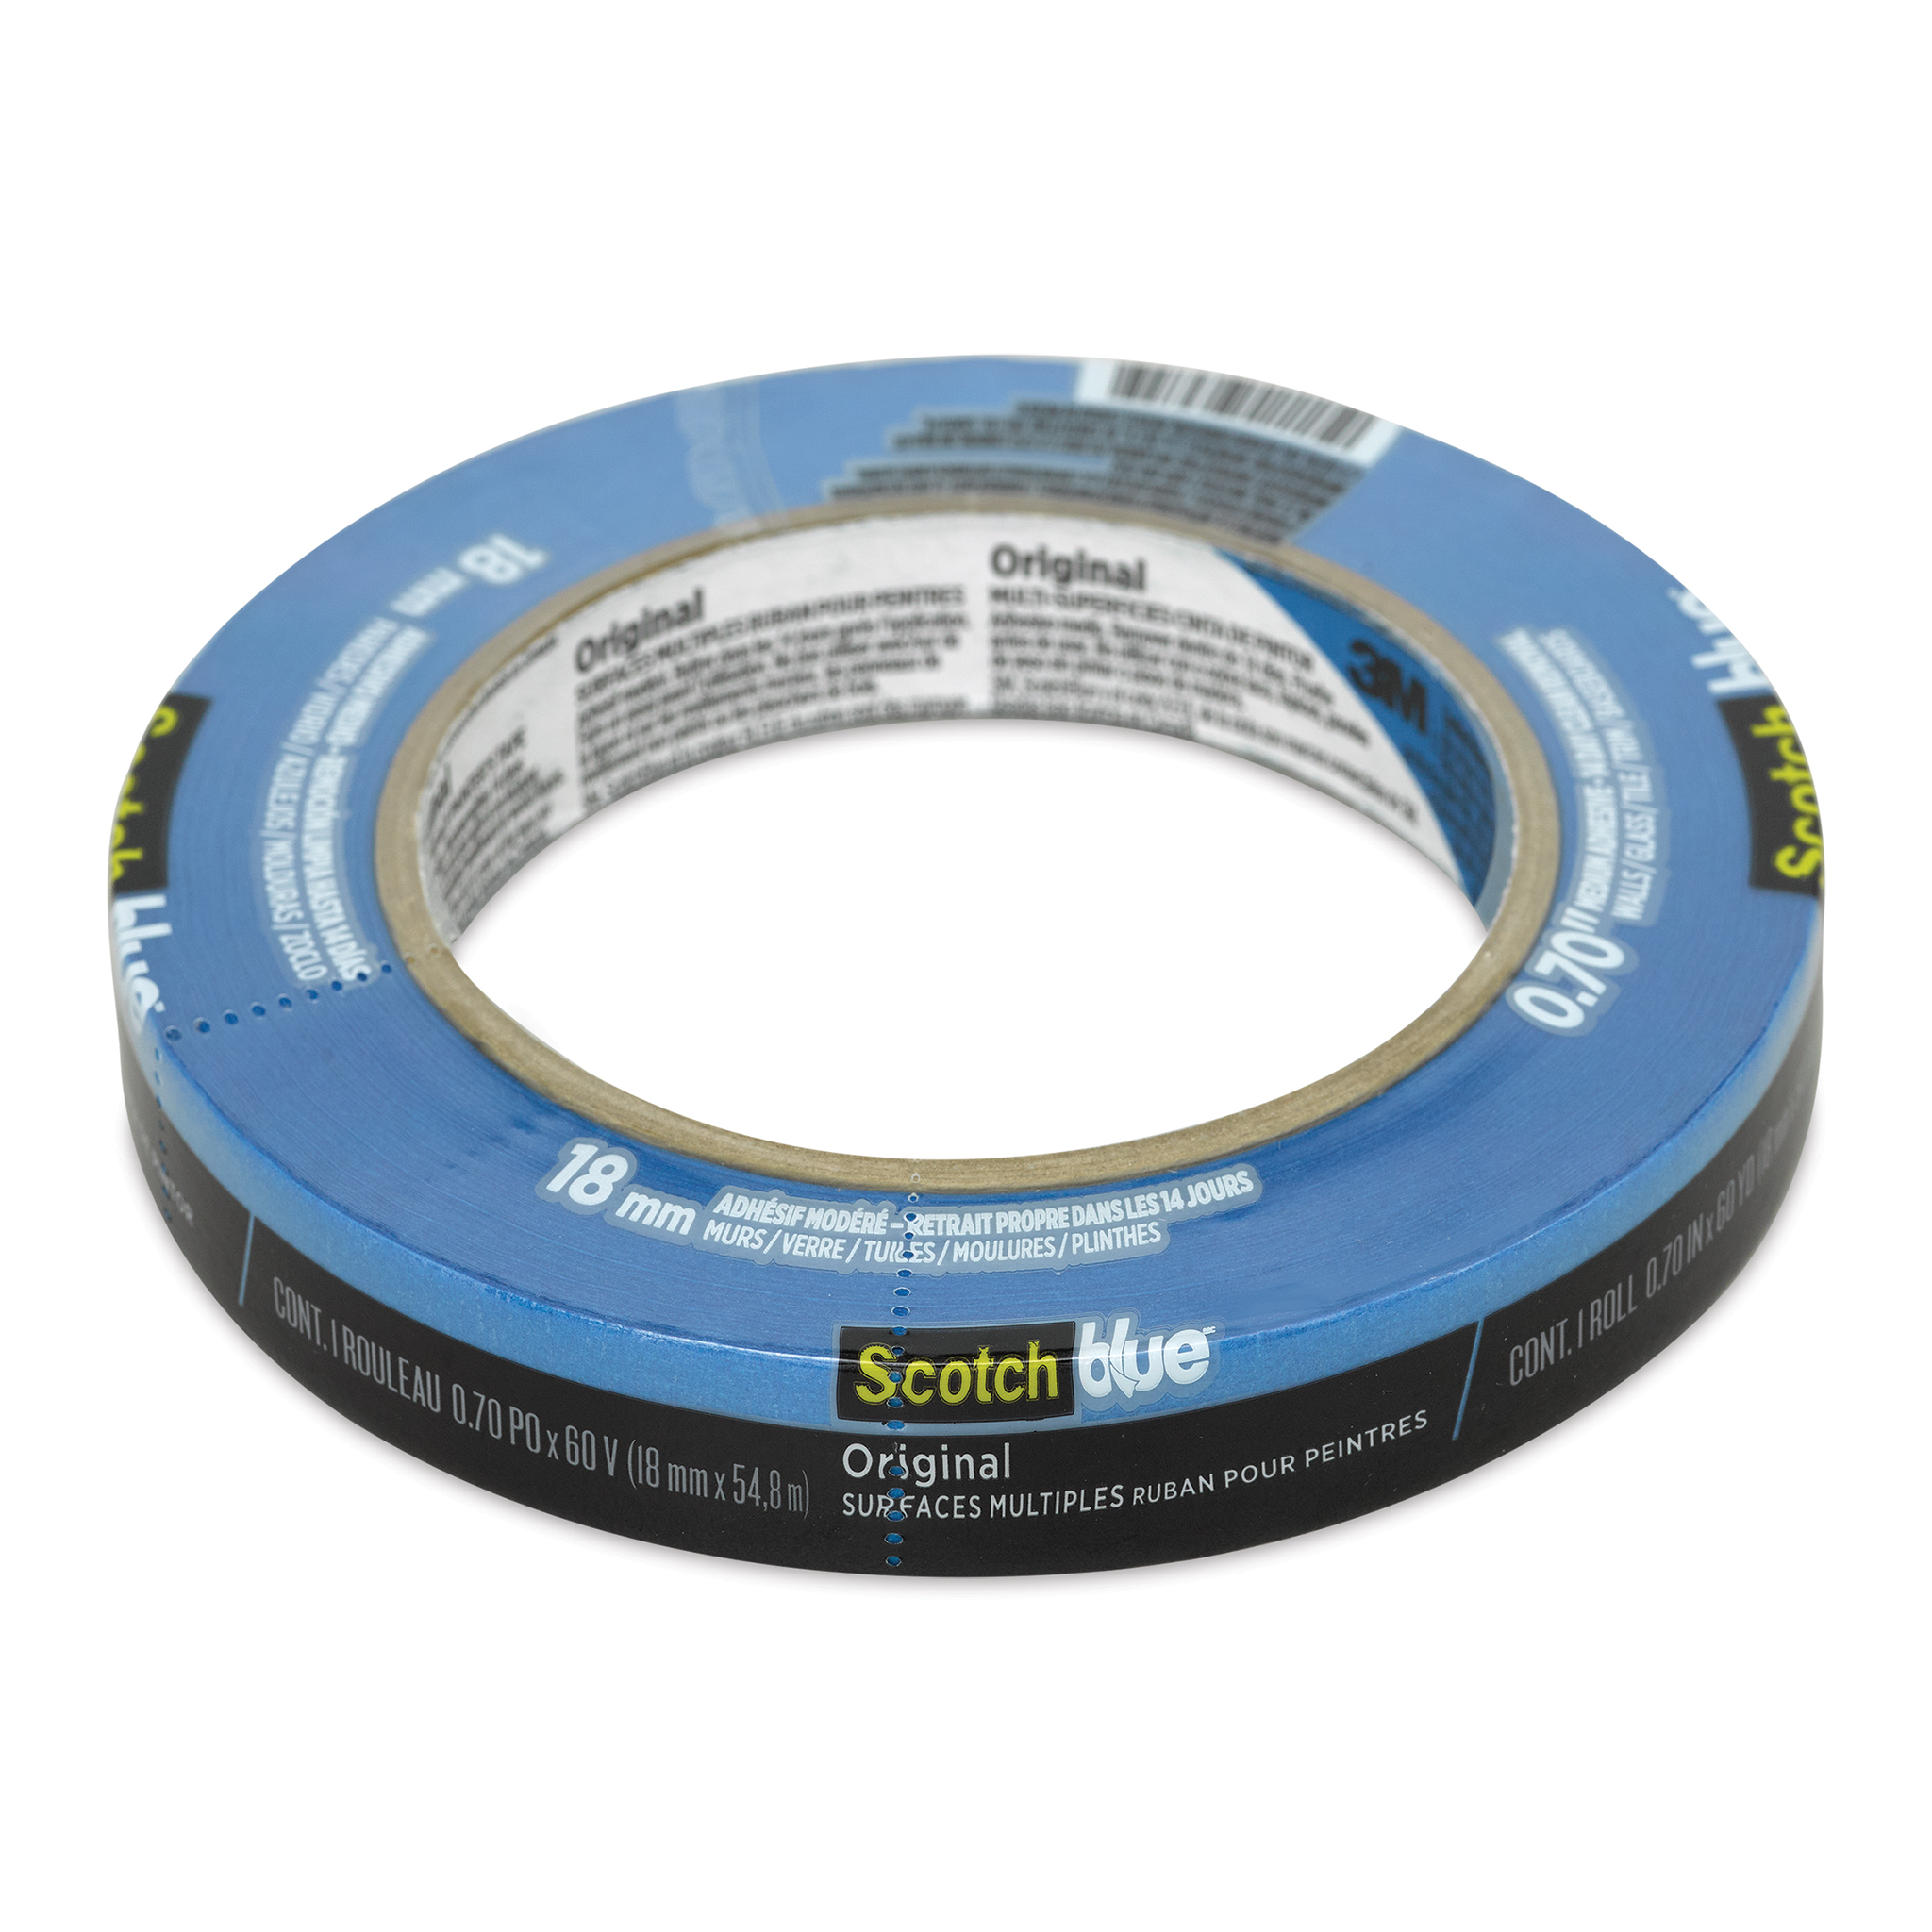 3M Scotch-Blue Advanced Delicate Surface Tape, 1.88 in x 60 Yds